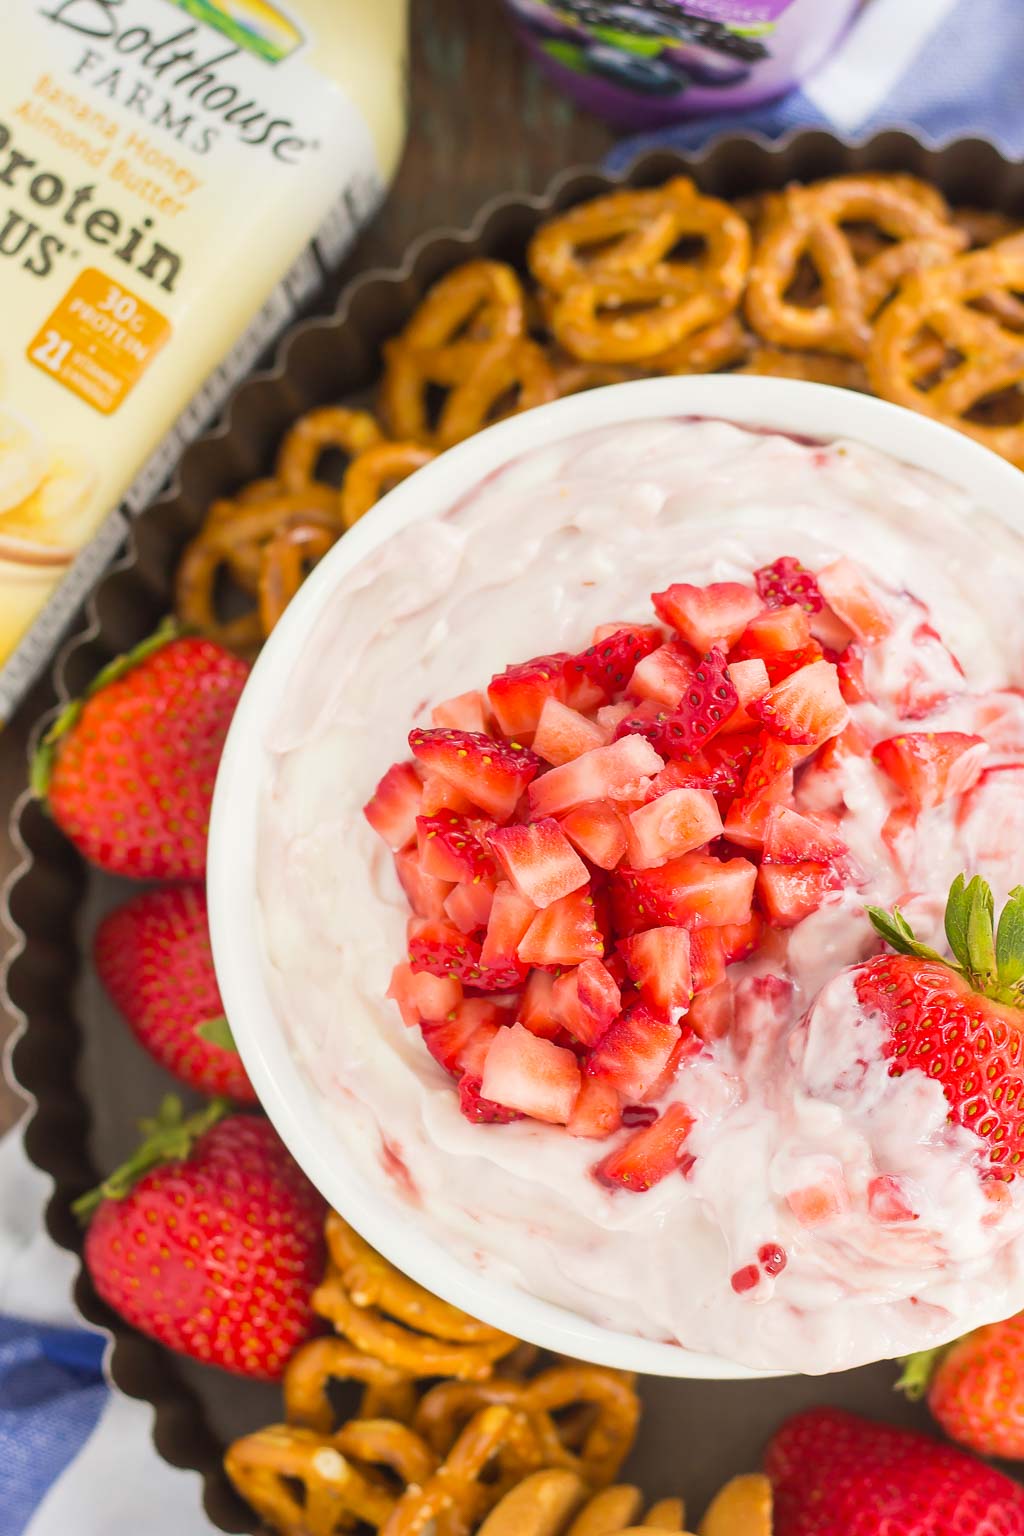 This no-bake, Greek Yogurt Strawberry Cheesecake Dip tastes just like your favorite cheesecake, in healthier form. With just five ingredients and hardly any prep time, you can have this easy dessert ready in less than 10 minutes. It's perfect to serve with some fresh fruit or pretzels, and makes a tasty dish for your summer parties or just for when you want something sweet!